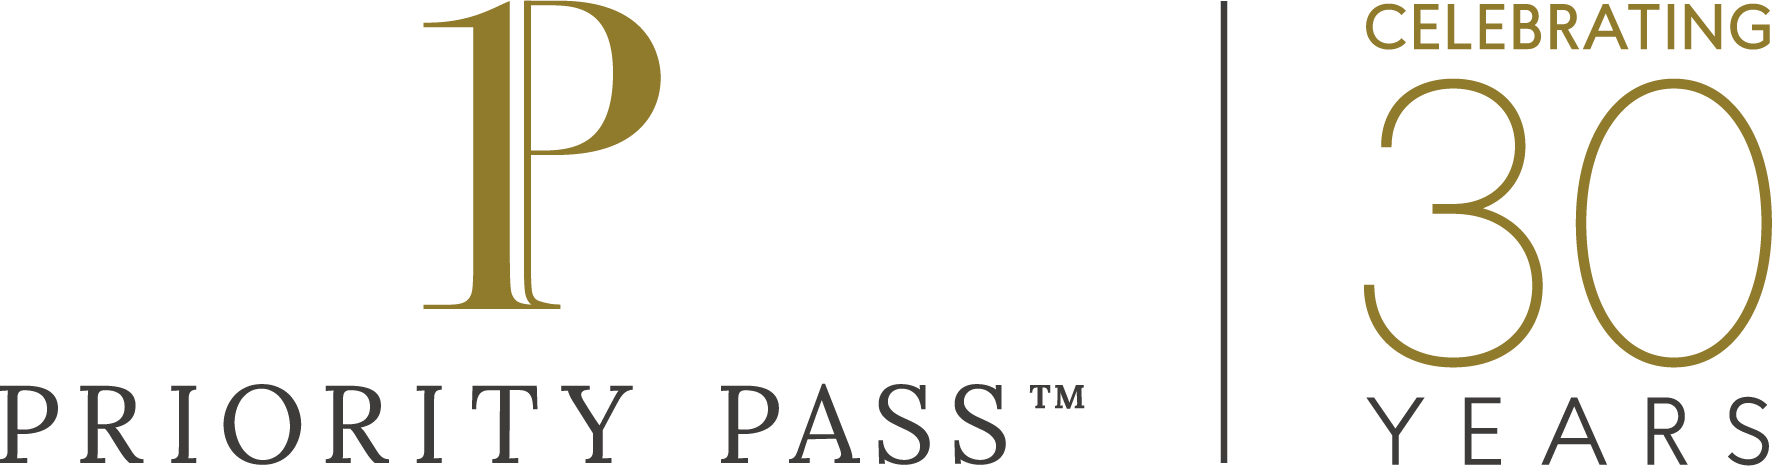 anne brant recommends All Japanese Pass Password